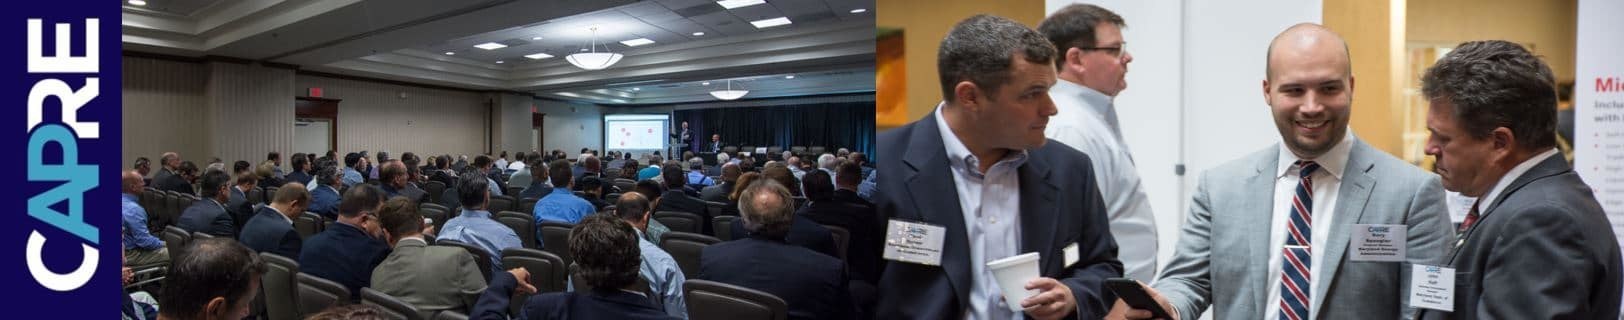 Impact of Blockchain, AI, Amazon on Data Center Design & Development; Join 400+ Data Center Real Estate, Connectivity and End-User Executives on September 12. CAPRE to present its 6th Annual Washington, D.C. & Mid-Atlantic Data Center Summit.  Sponsorship/Exhibitor opportunities are available.